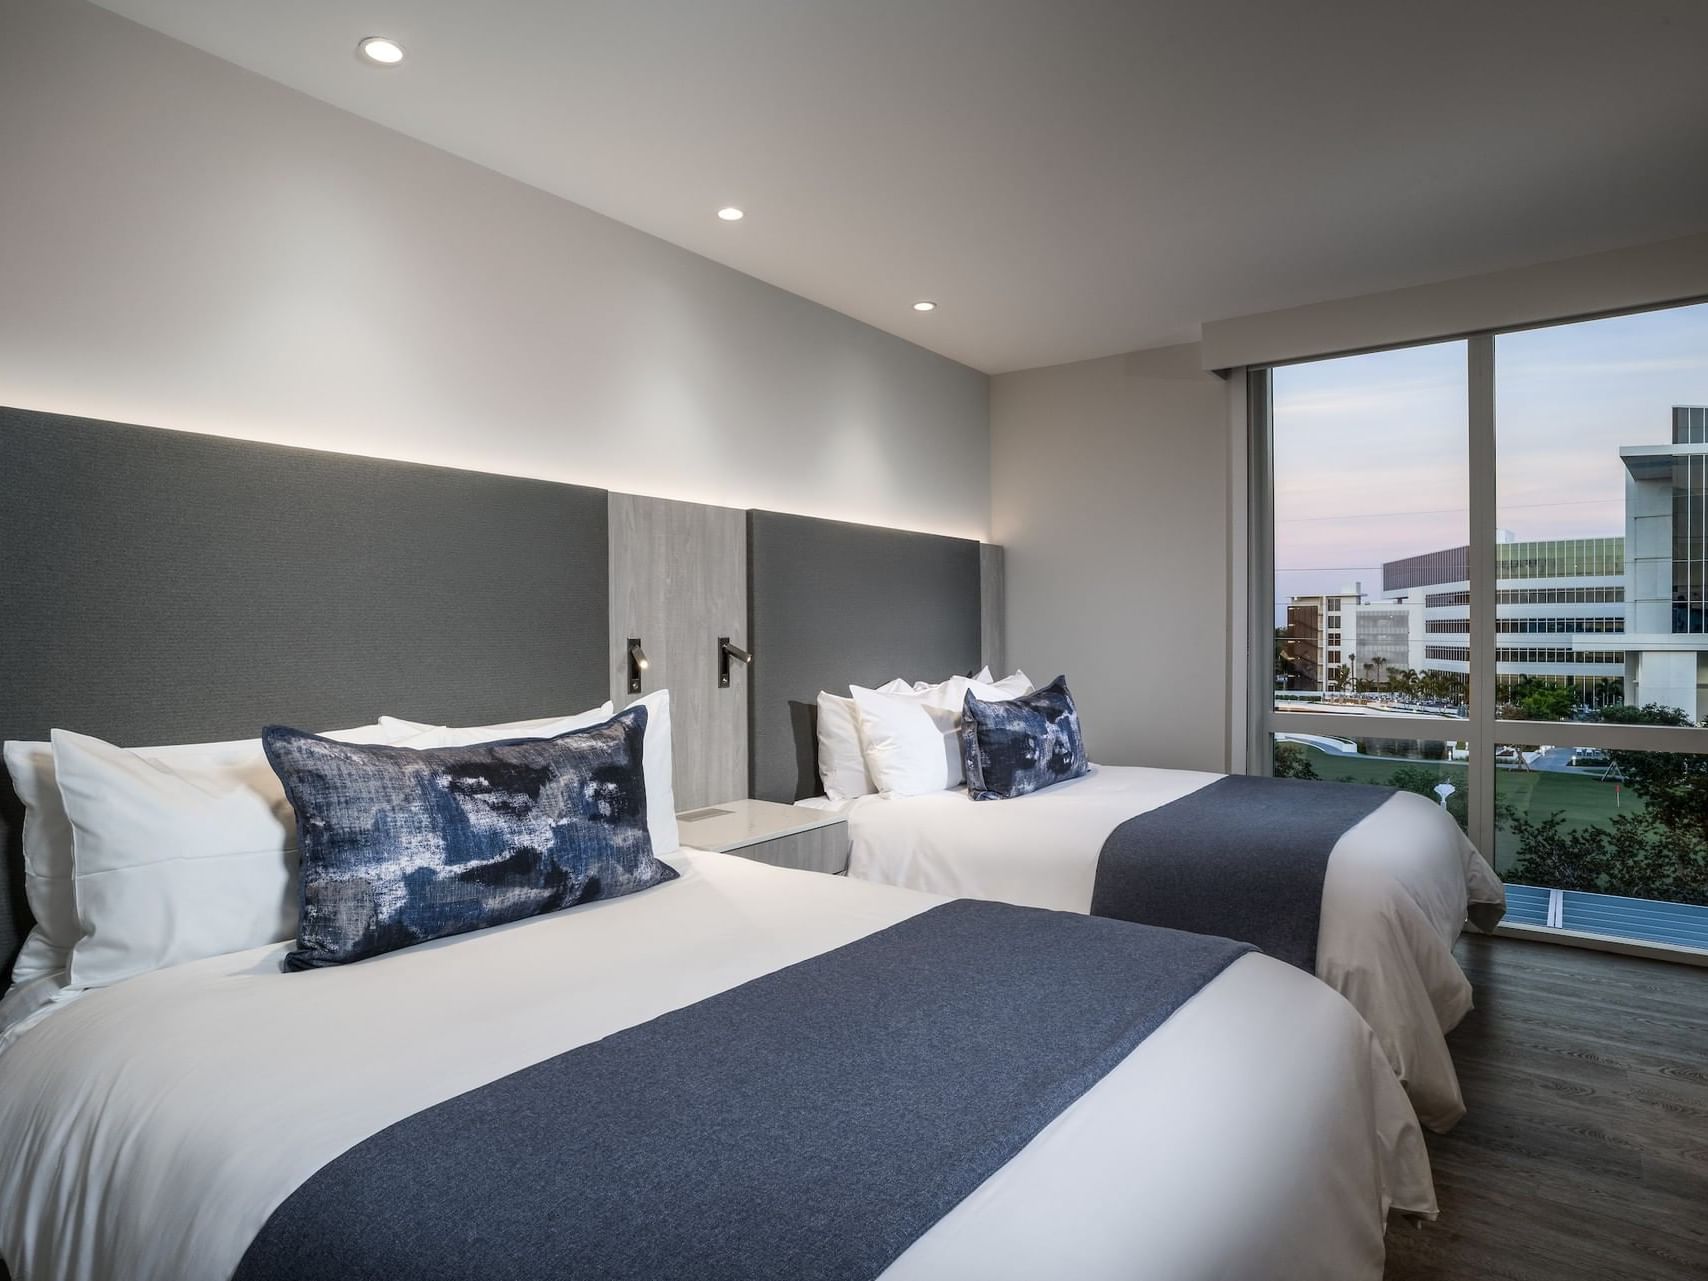 2 Cozy beds & city view in 2 Queen Beds roomat Innovation Hotel